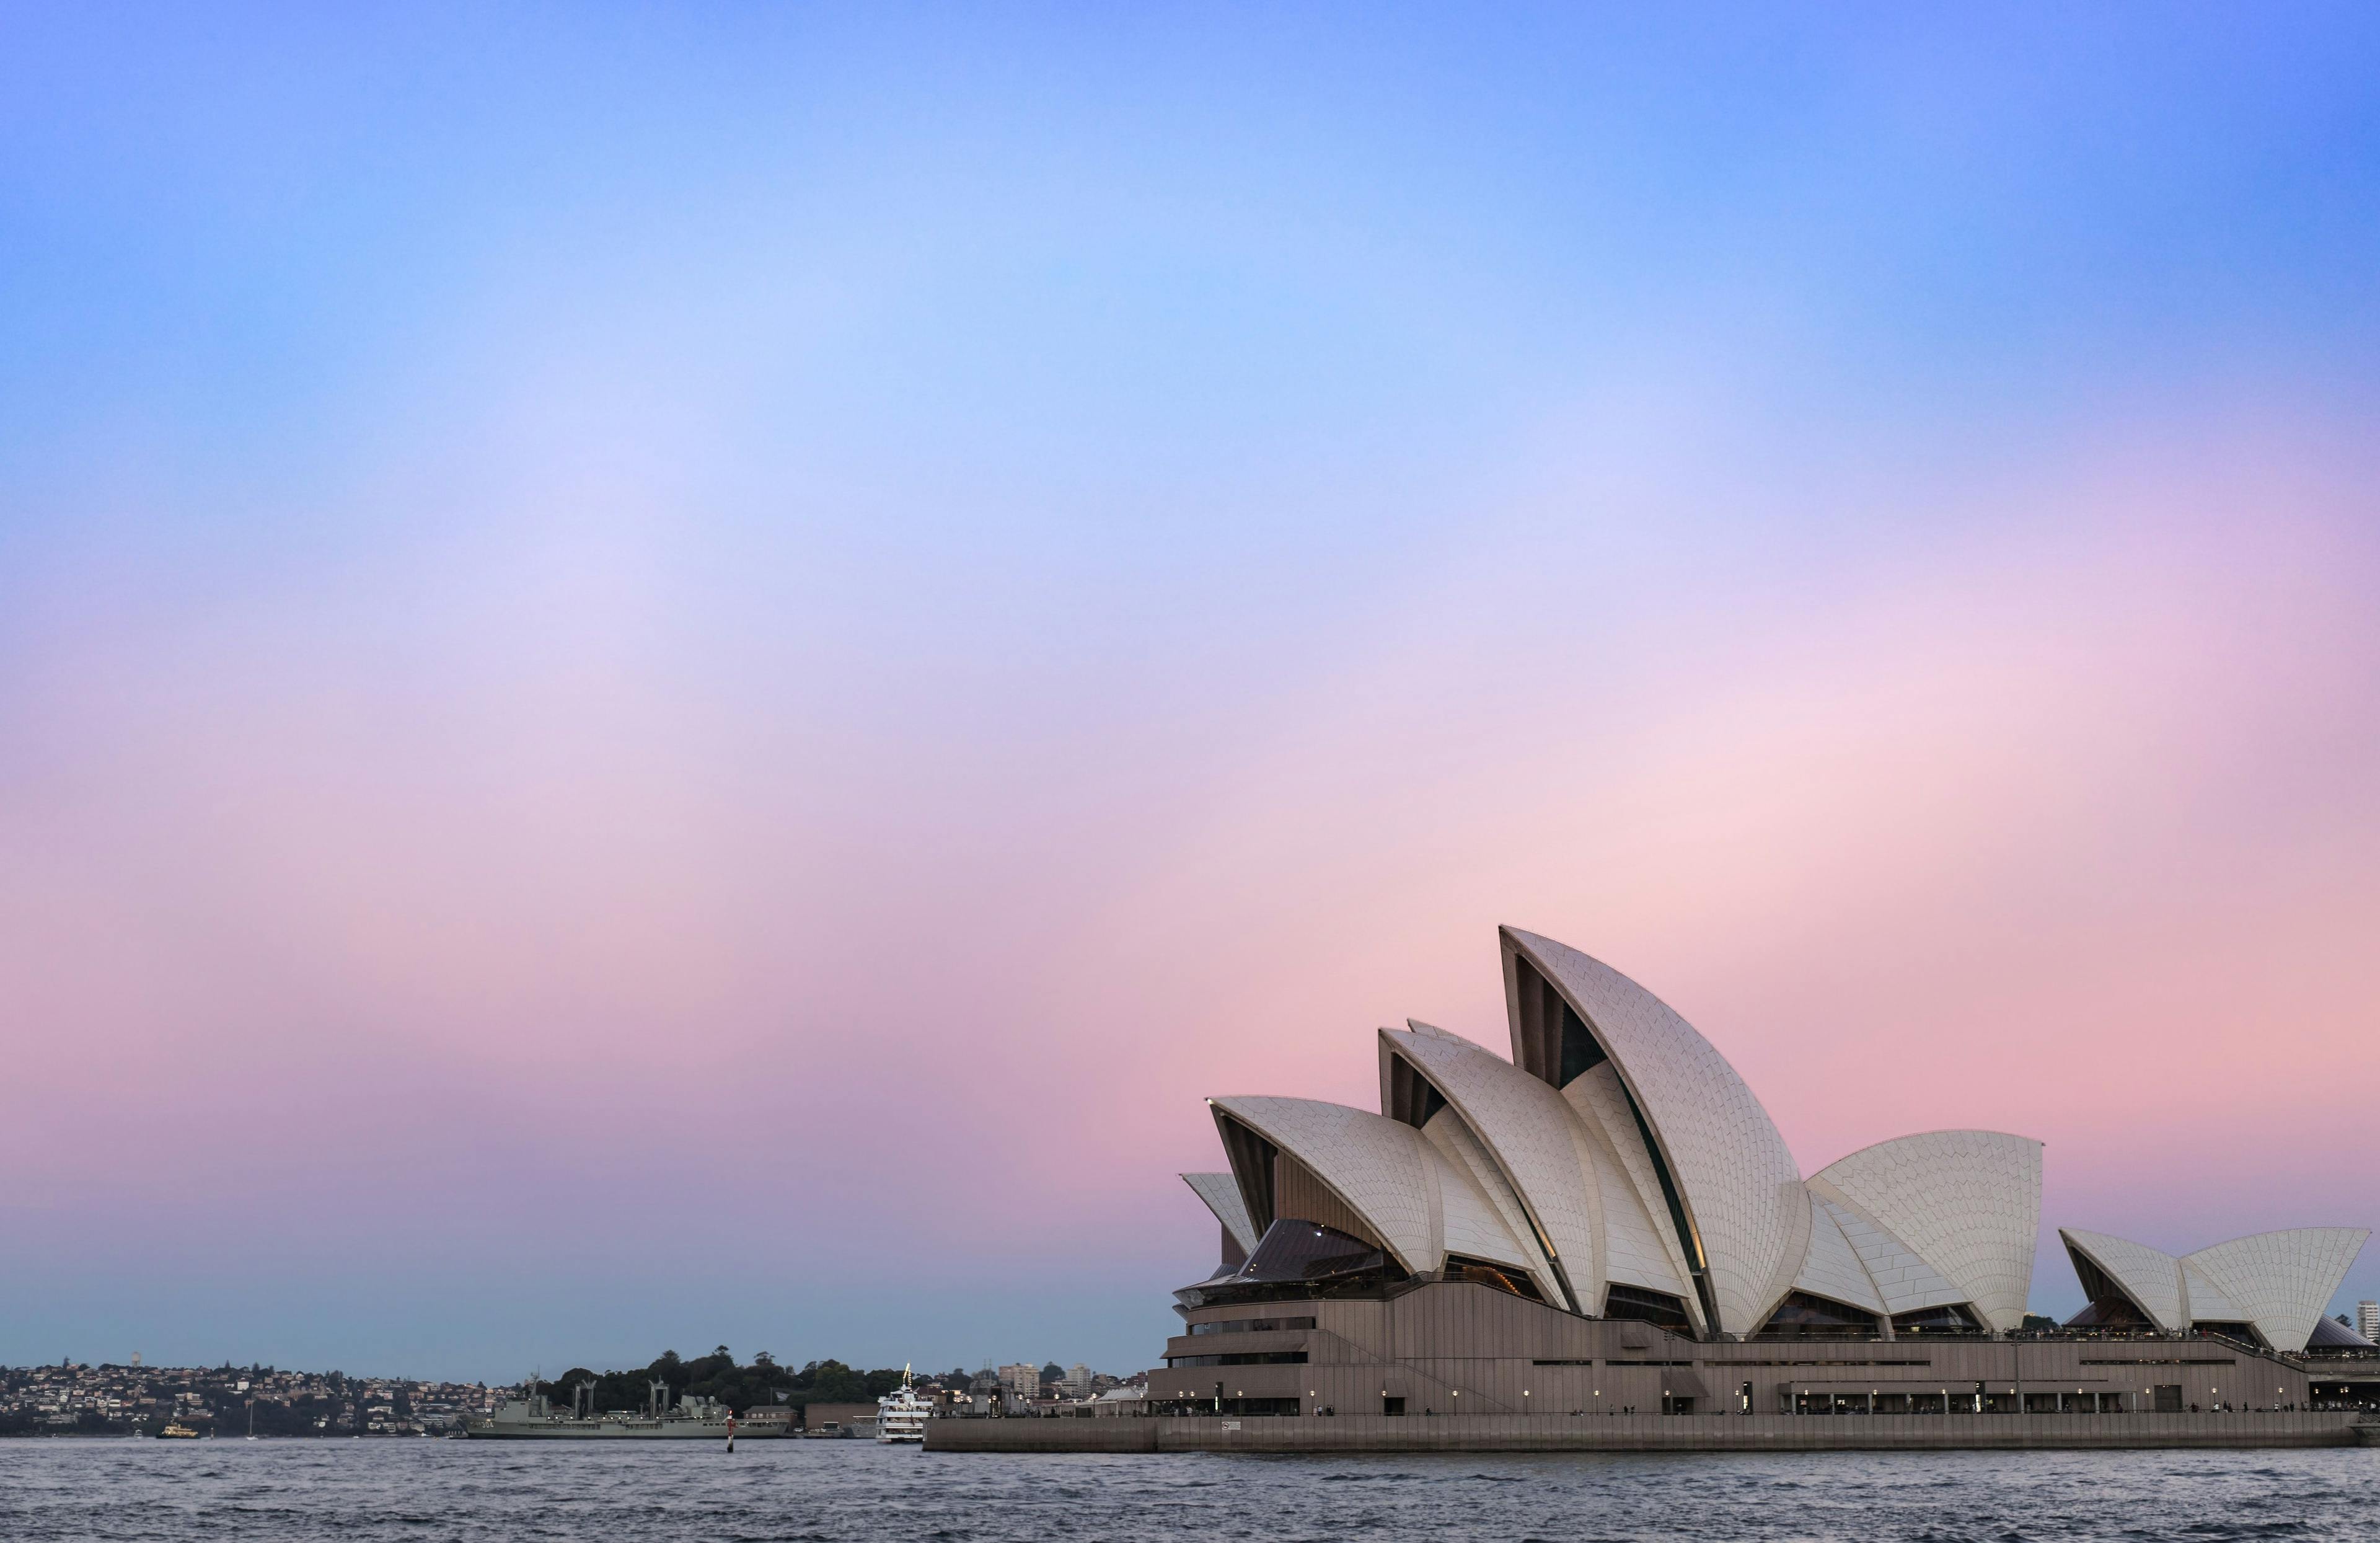 The opera house in Sydney Australia with a colourfull sky background.